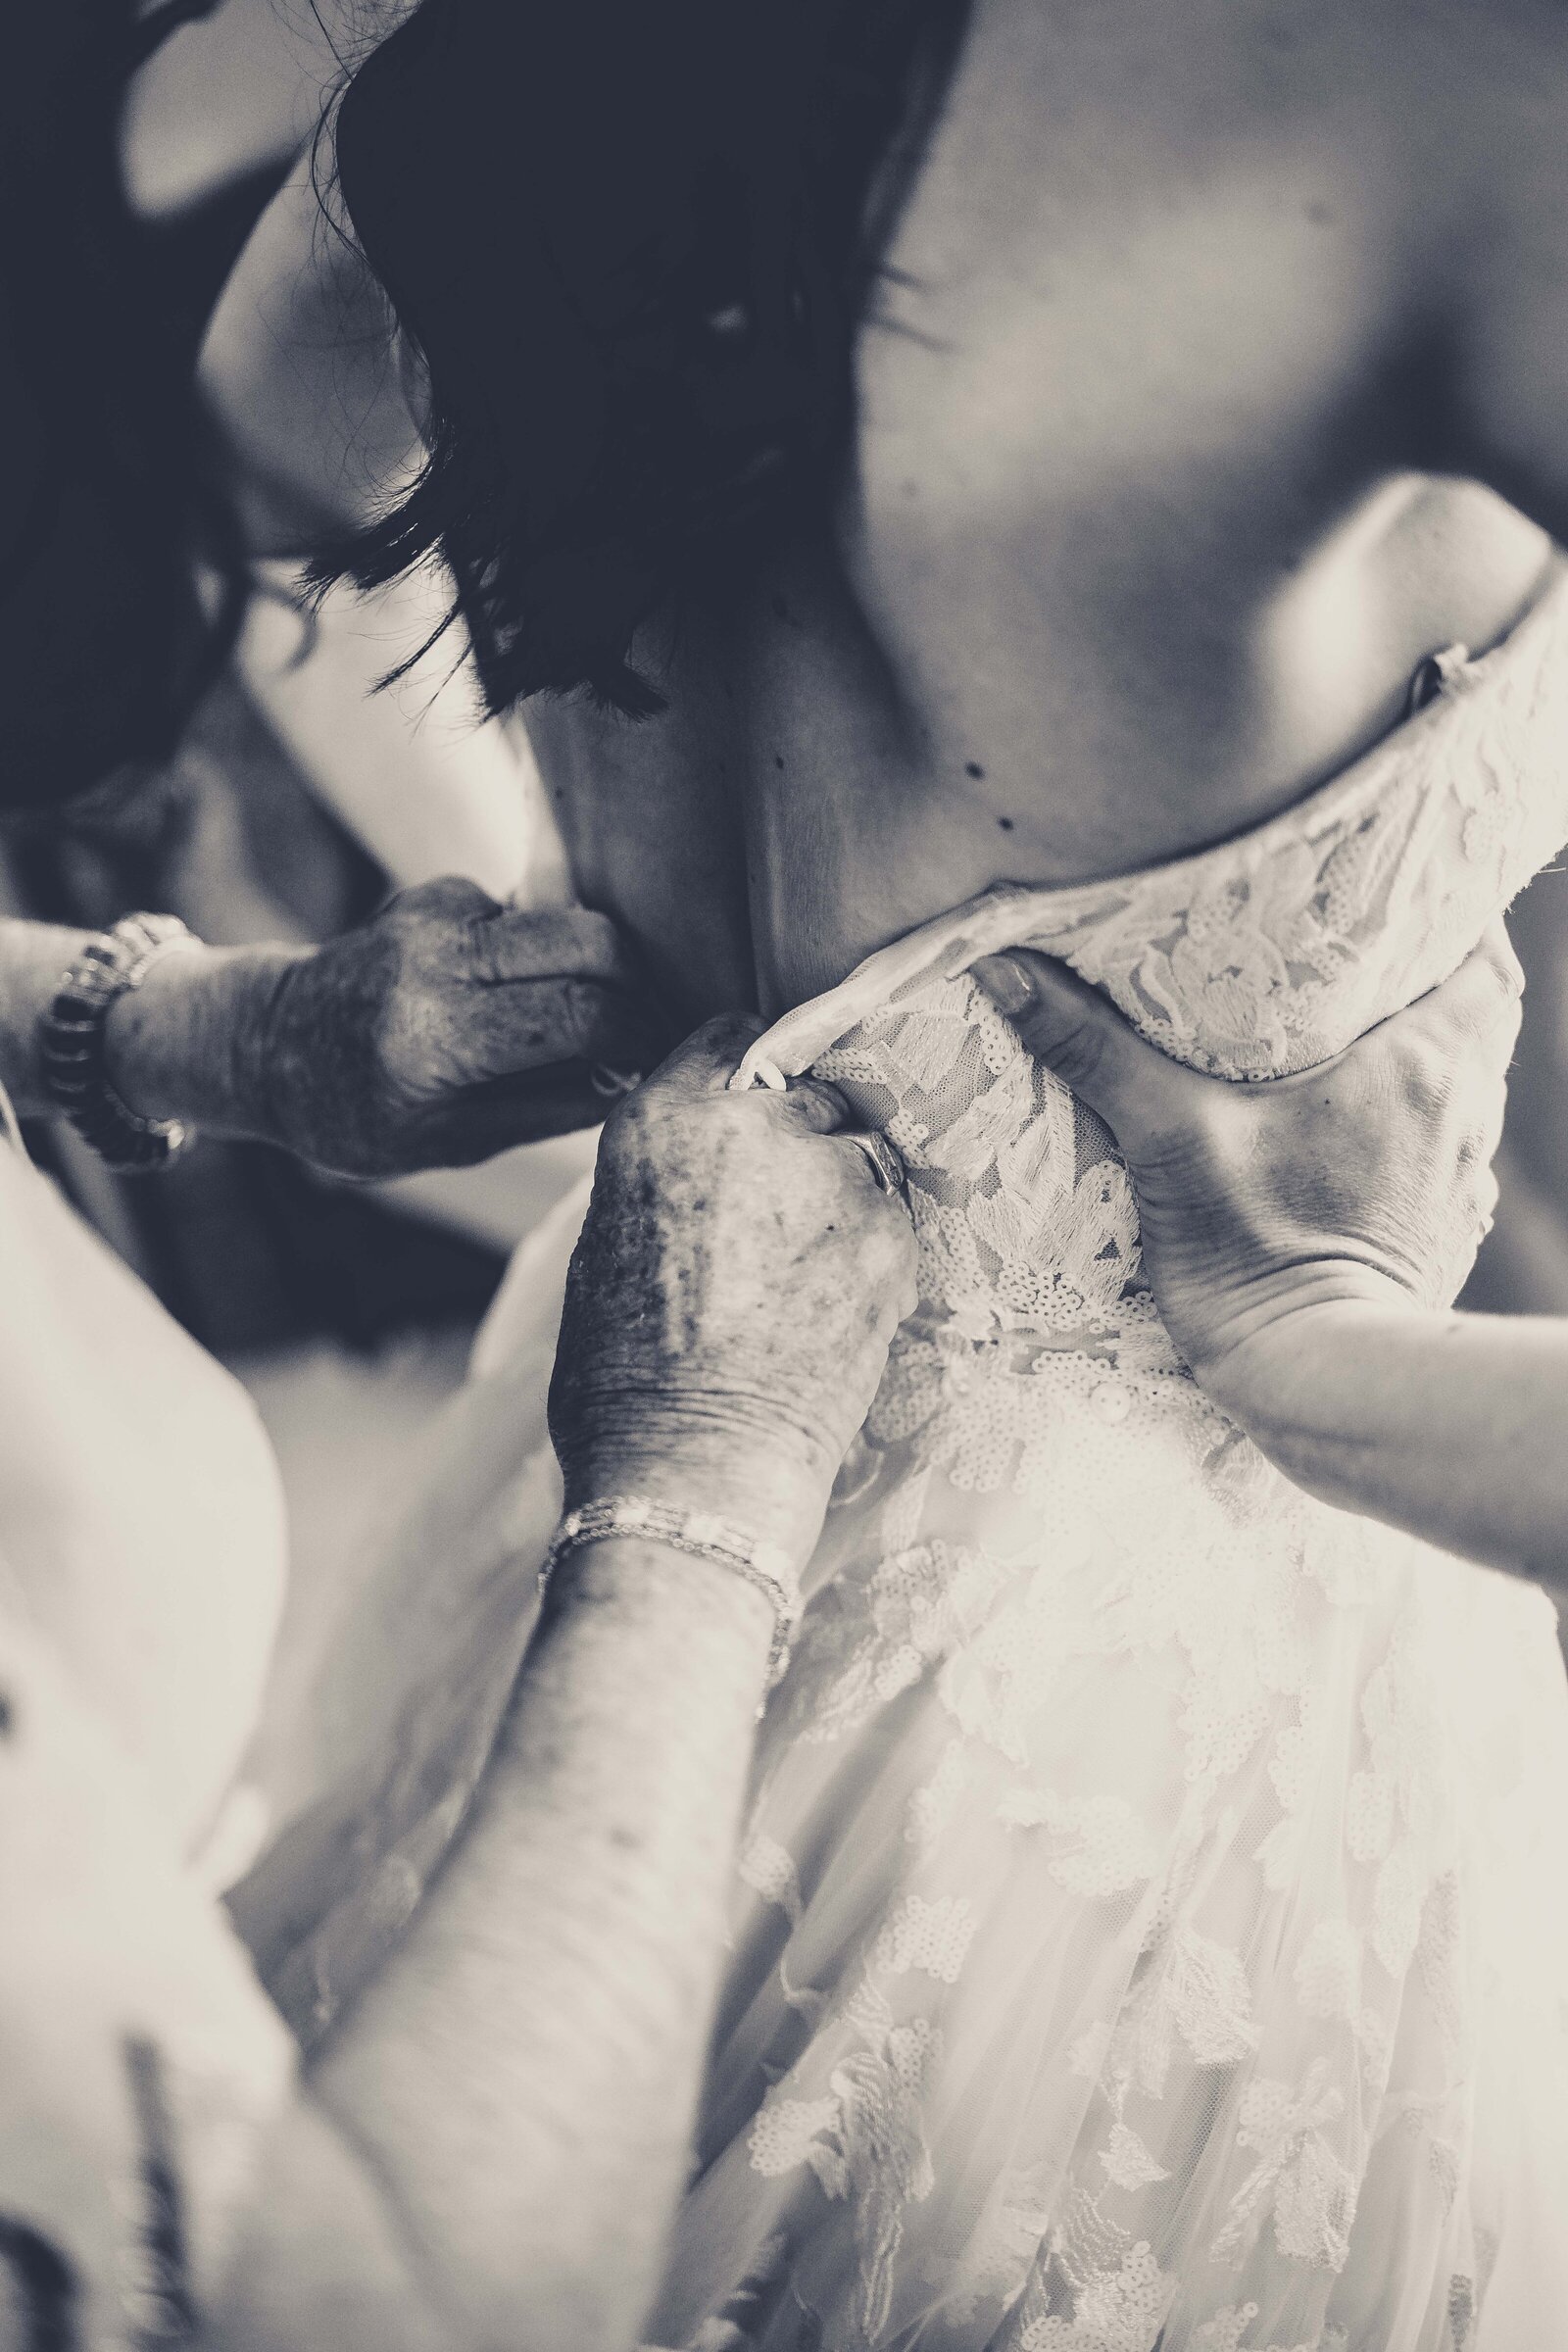 Witness a poignant and heartwarming moment as a mother carefully zips up her daughter's wedding dress, symbolizing the emotional bond and support on this significant day. Captured with tenderness and care, this image showcases the intricate details of the dress and the loving connection between generations. Ideal for those inspired by the intimate family moments that enrich the wedding experience, this photograph highlights the blend of love, tradition, and anticipation that defines a bride’s preparation.